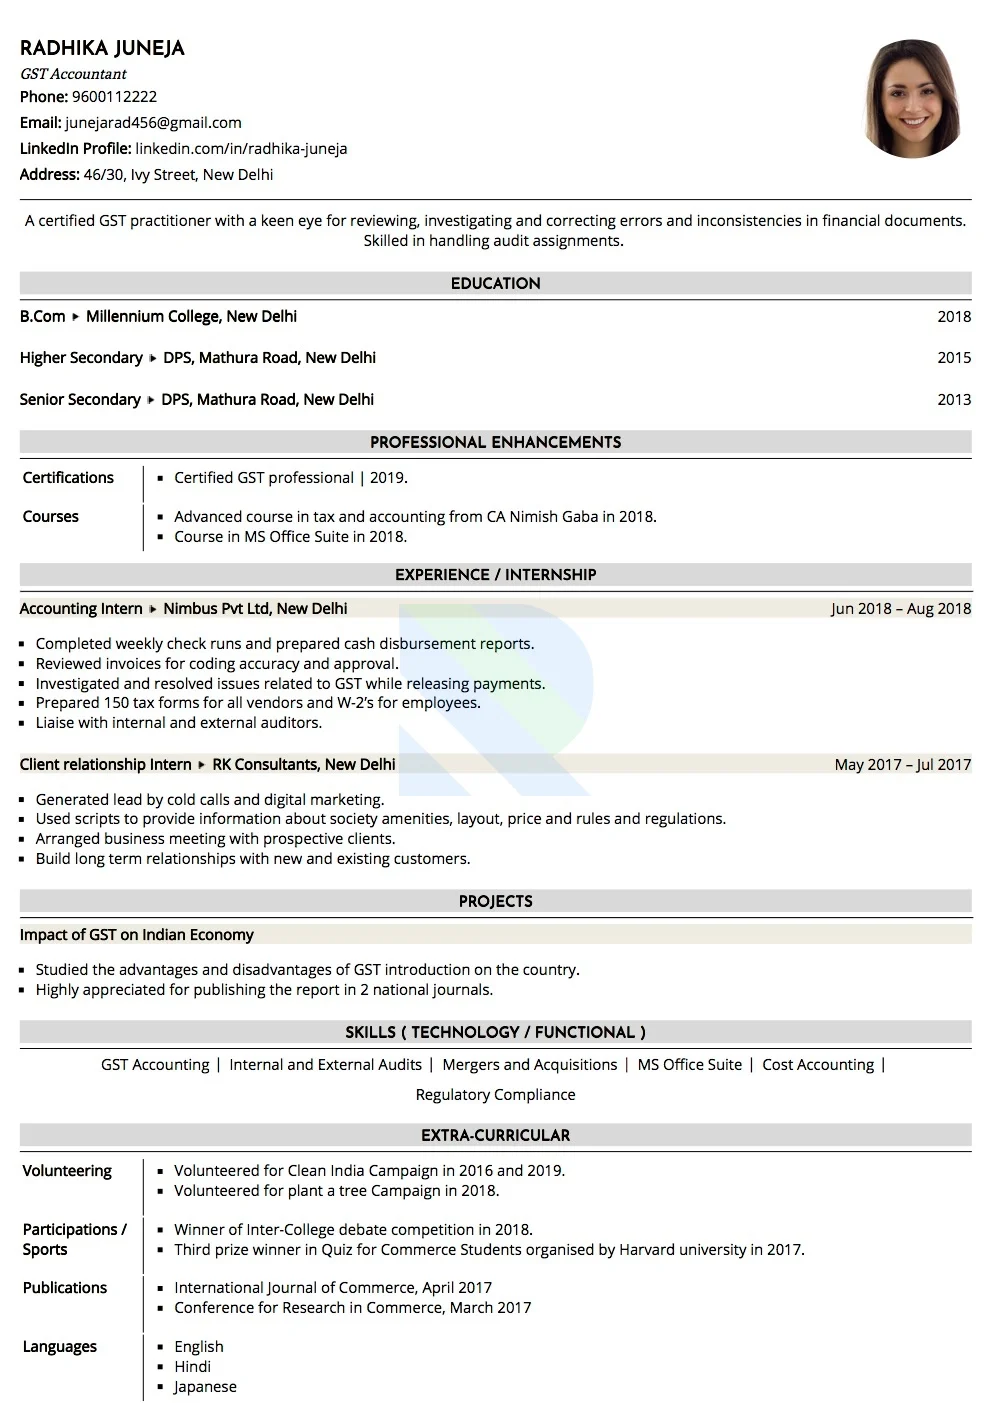 Sample Resume of GST Accountant  | Free Resume Templates & Samples on Resumod.co